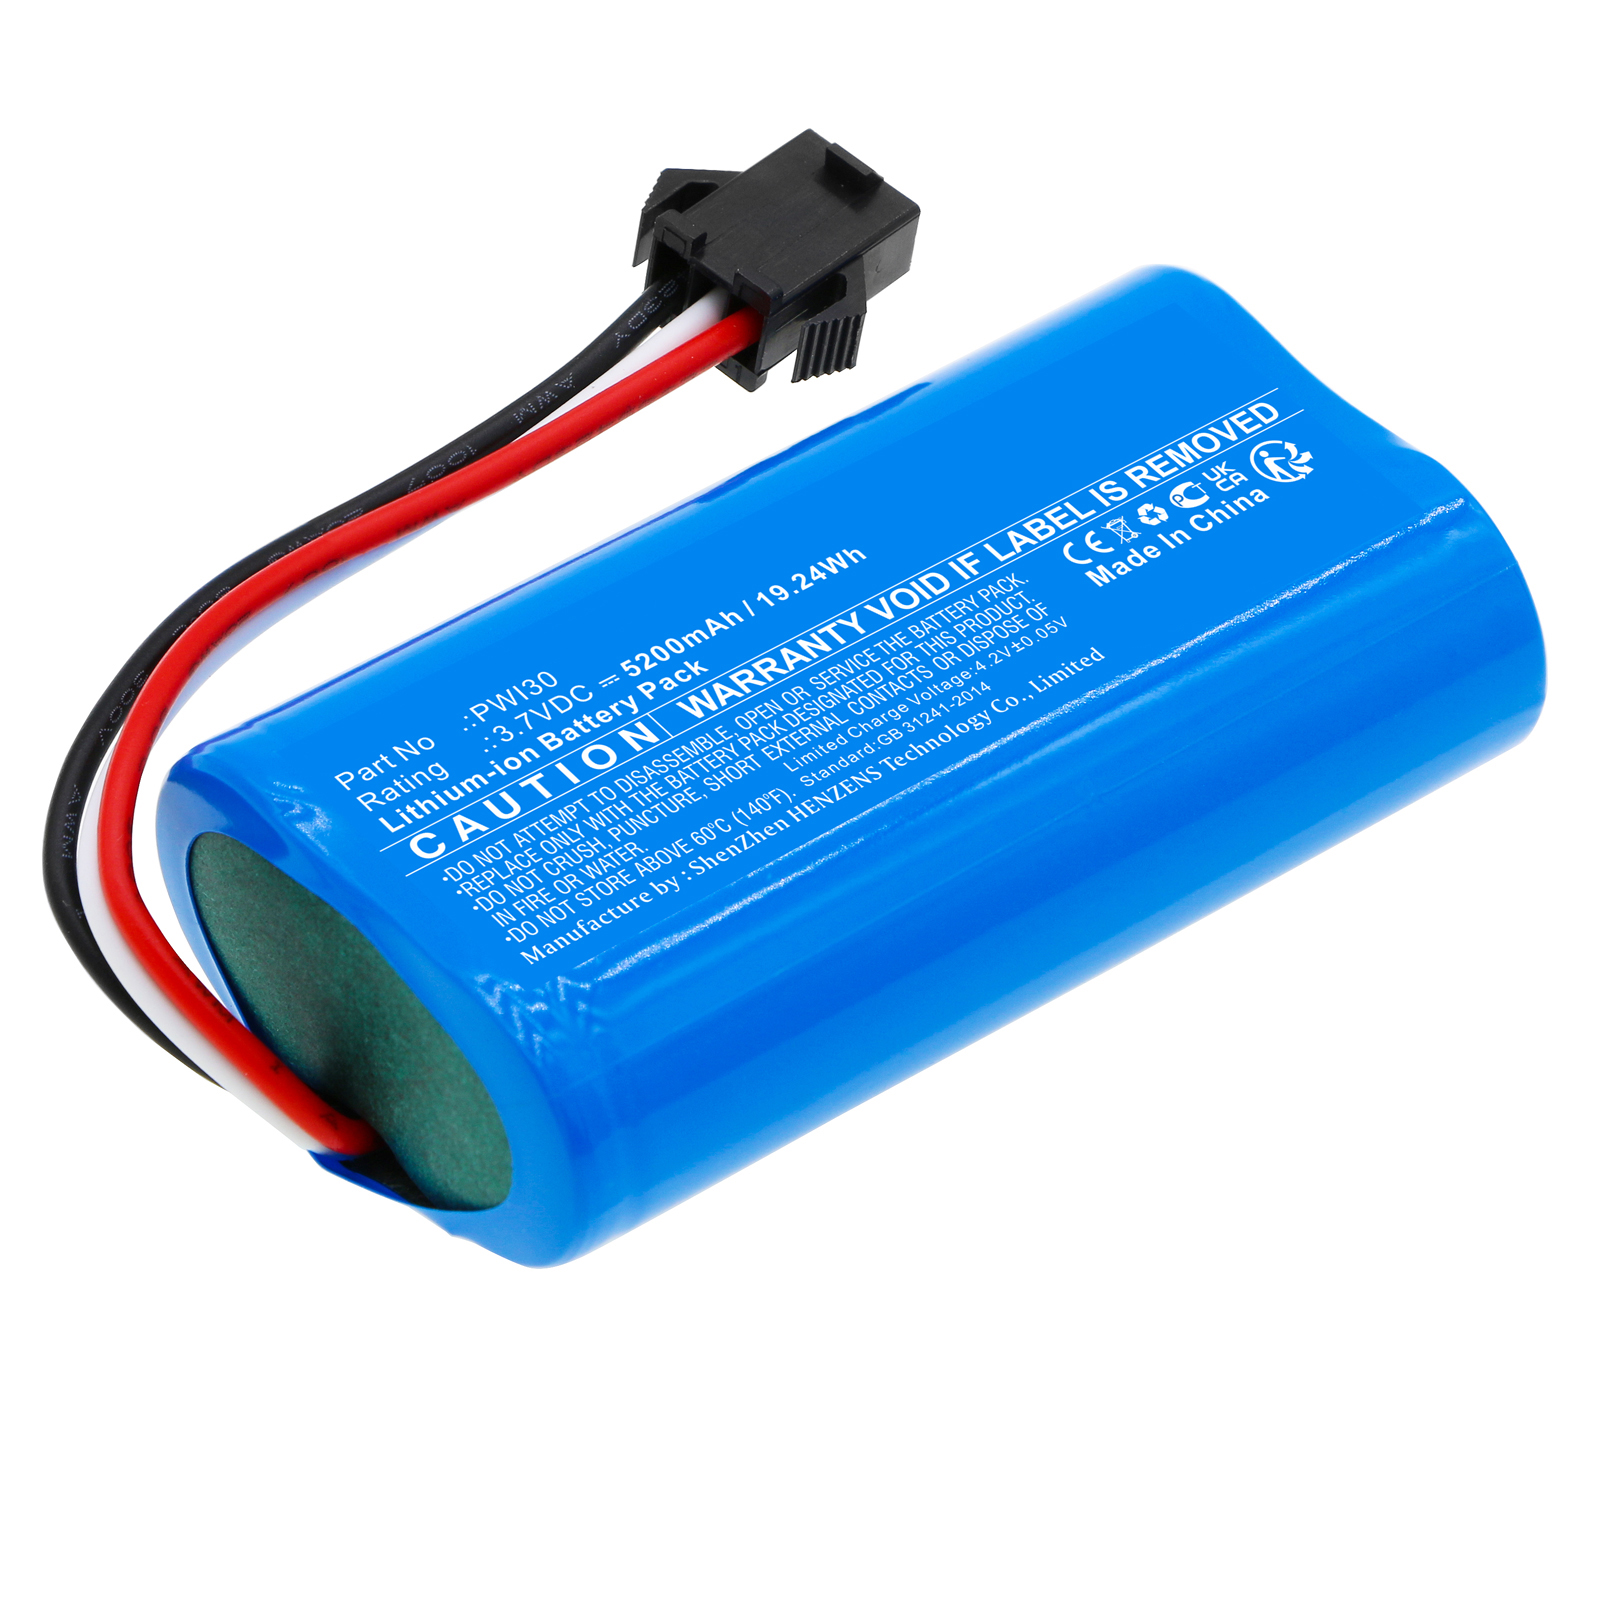 Synergy Digital Medical Battery, Compatible with ADE ISR18650 Medical Battery (Li-ion, 3.7V, 5200mAh)